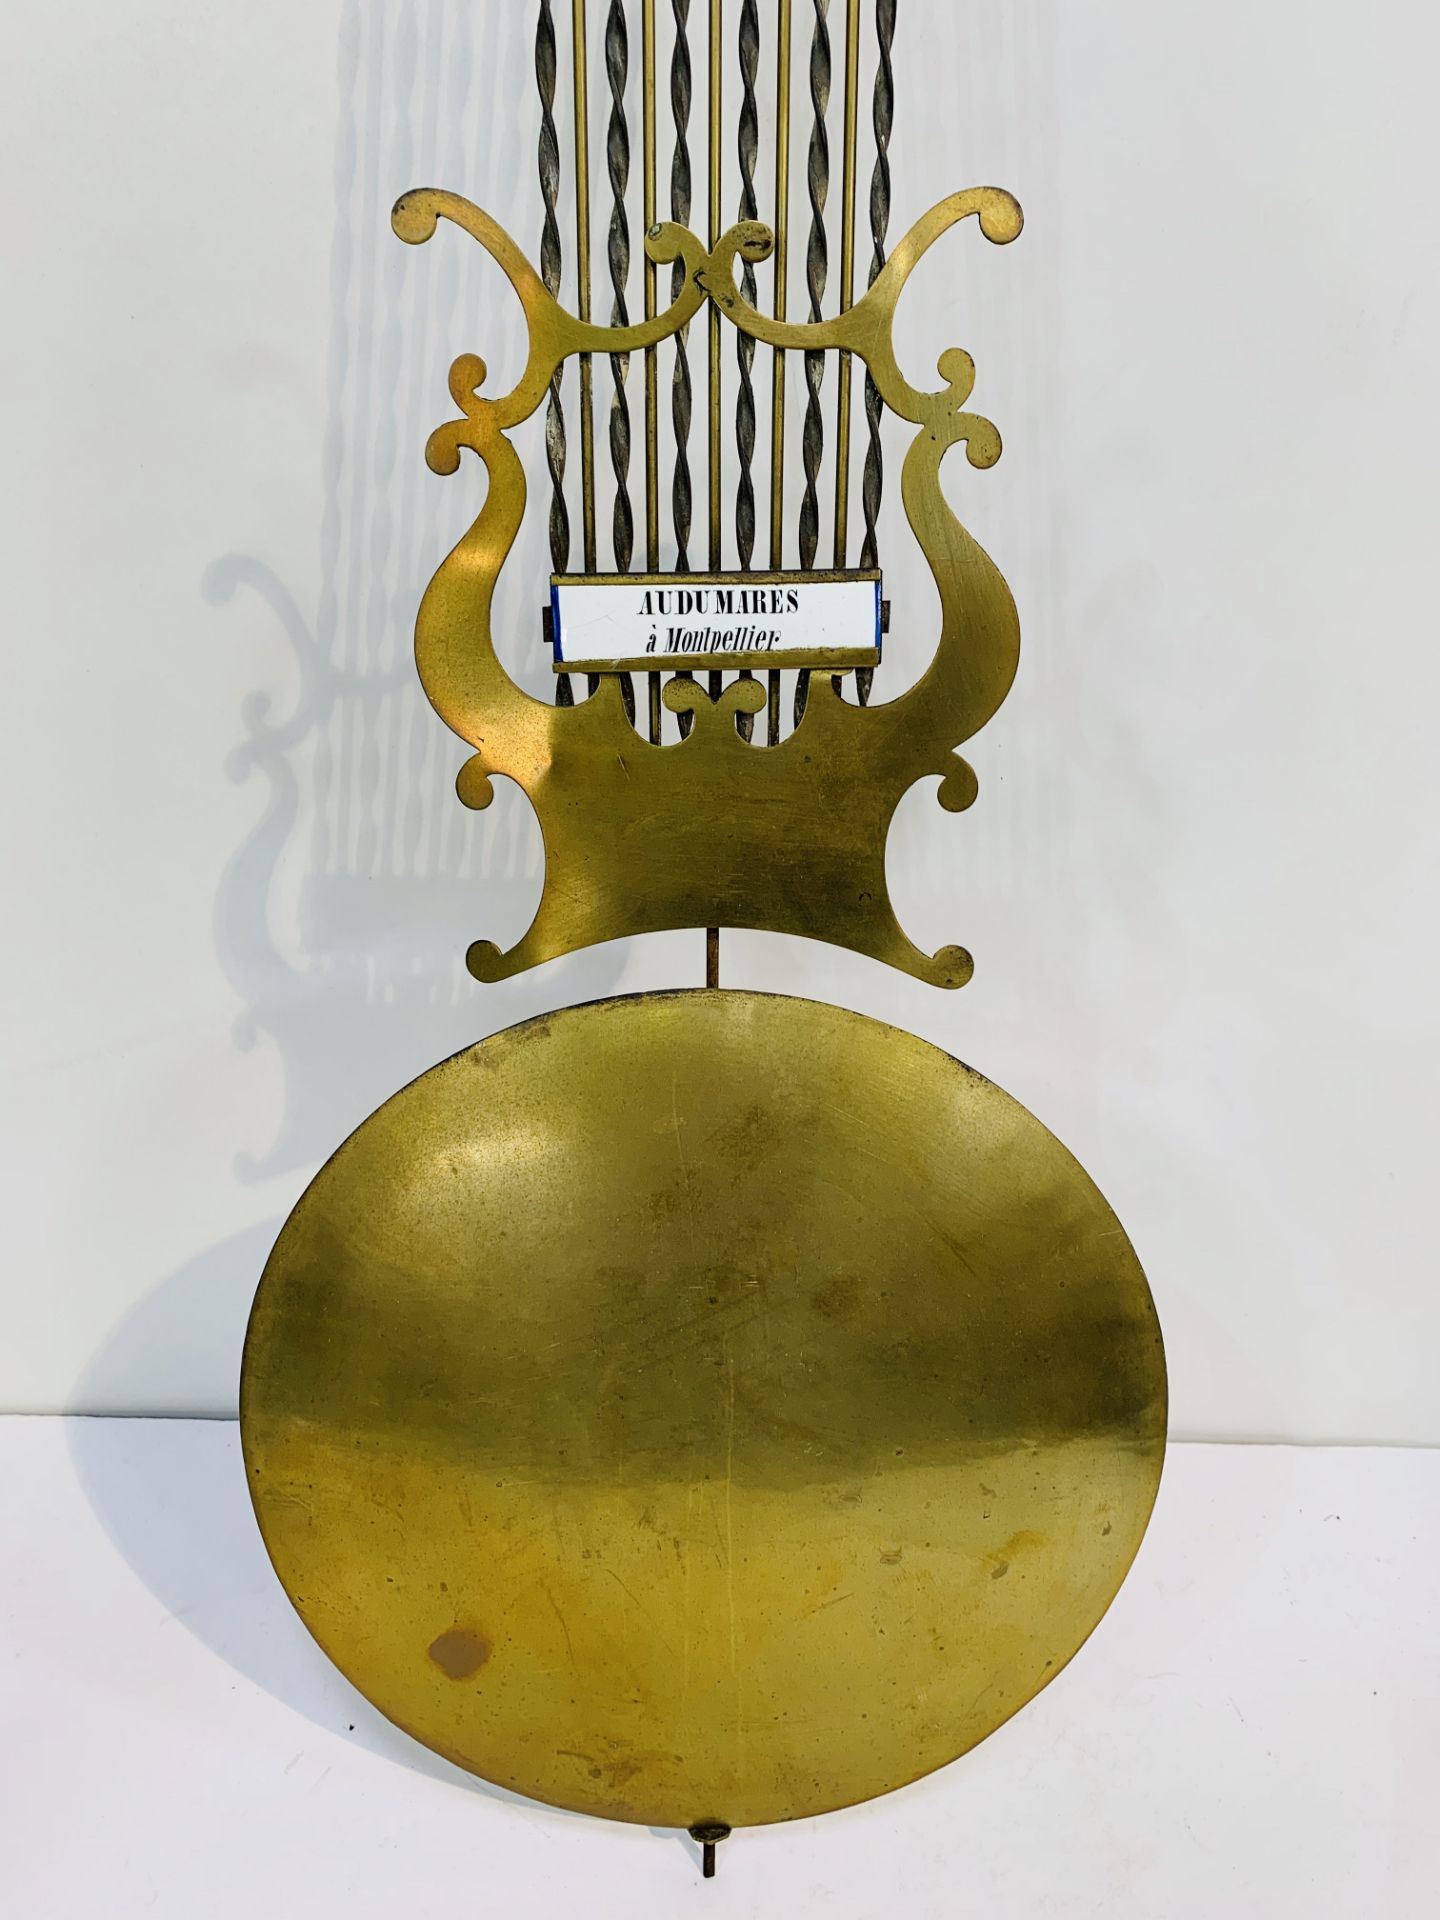 Circa 1860 French Vineyard Comtoise clock marked for ‘Mares’ of Montpellier. - Image 2 of 3